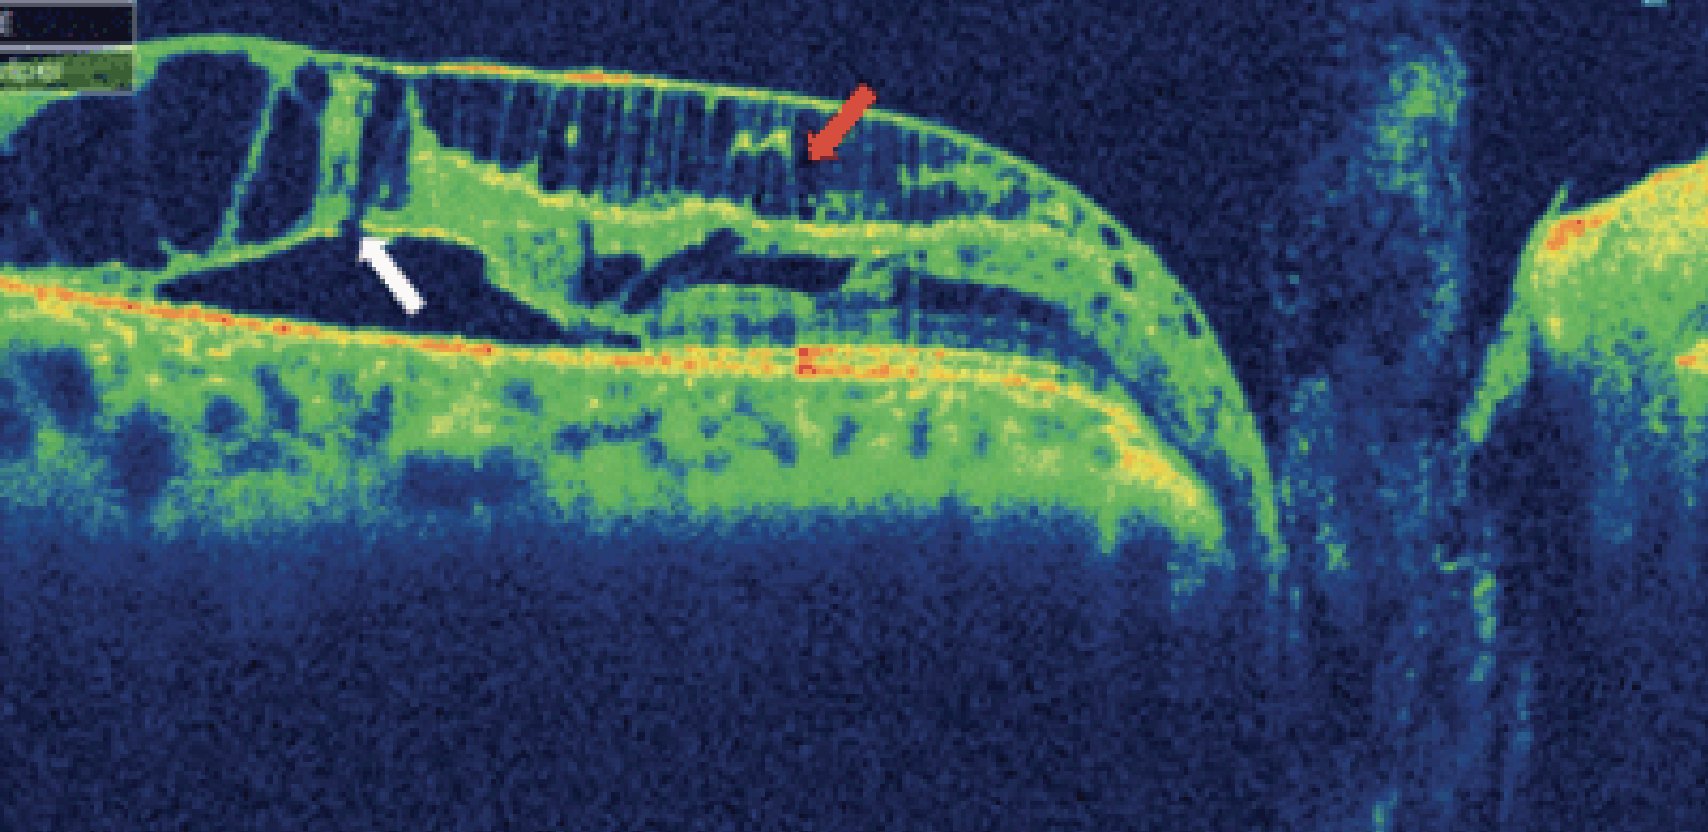 Multiple retinal splits can be seen in this patient with an optic pit is typical of a macula retinoschisis. 